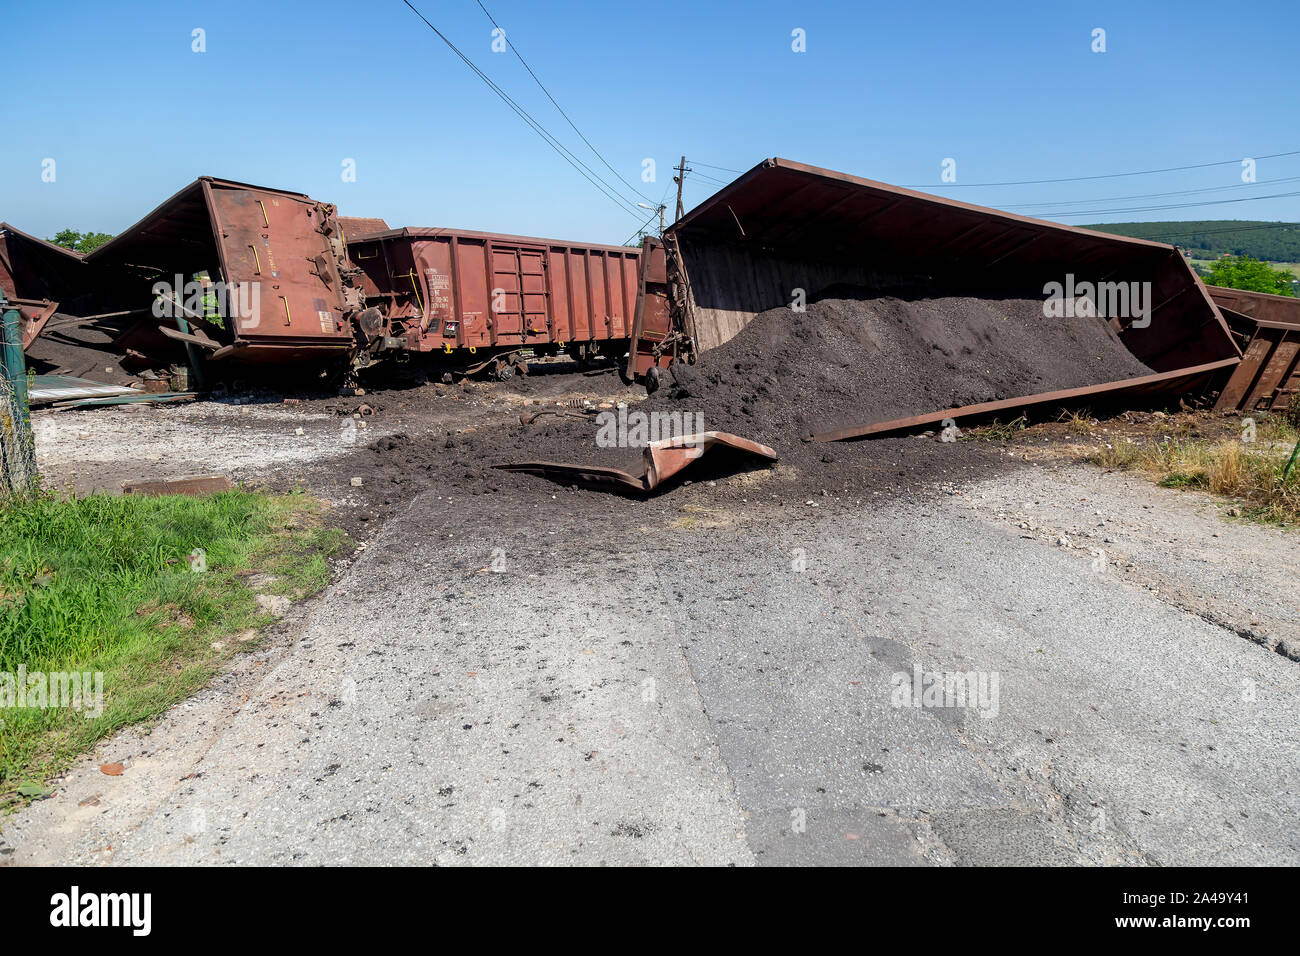 Train crash accident, road block. Mechanical problems and track conditions are to blame for a train derailment. Abstract: Transportation Safety Stock Photo